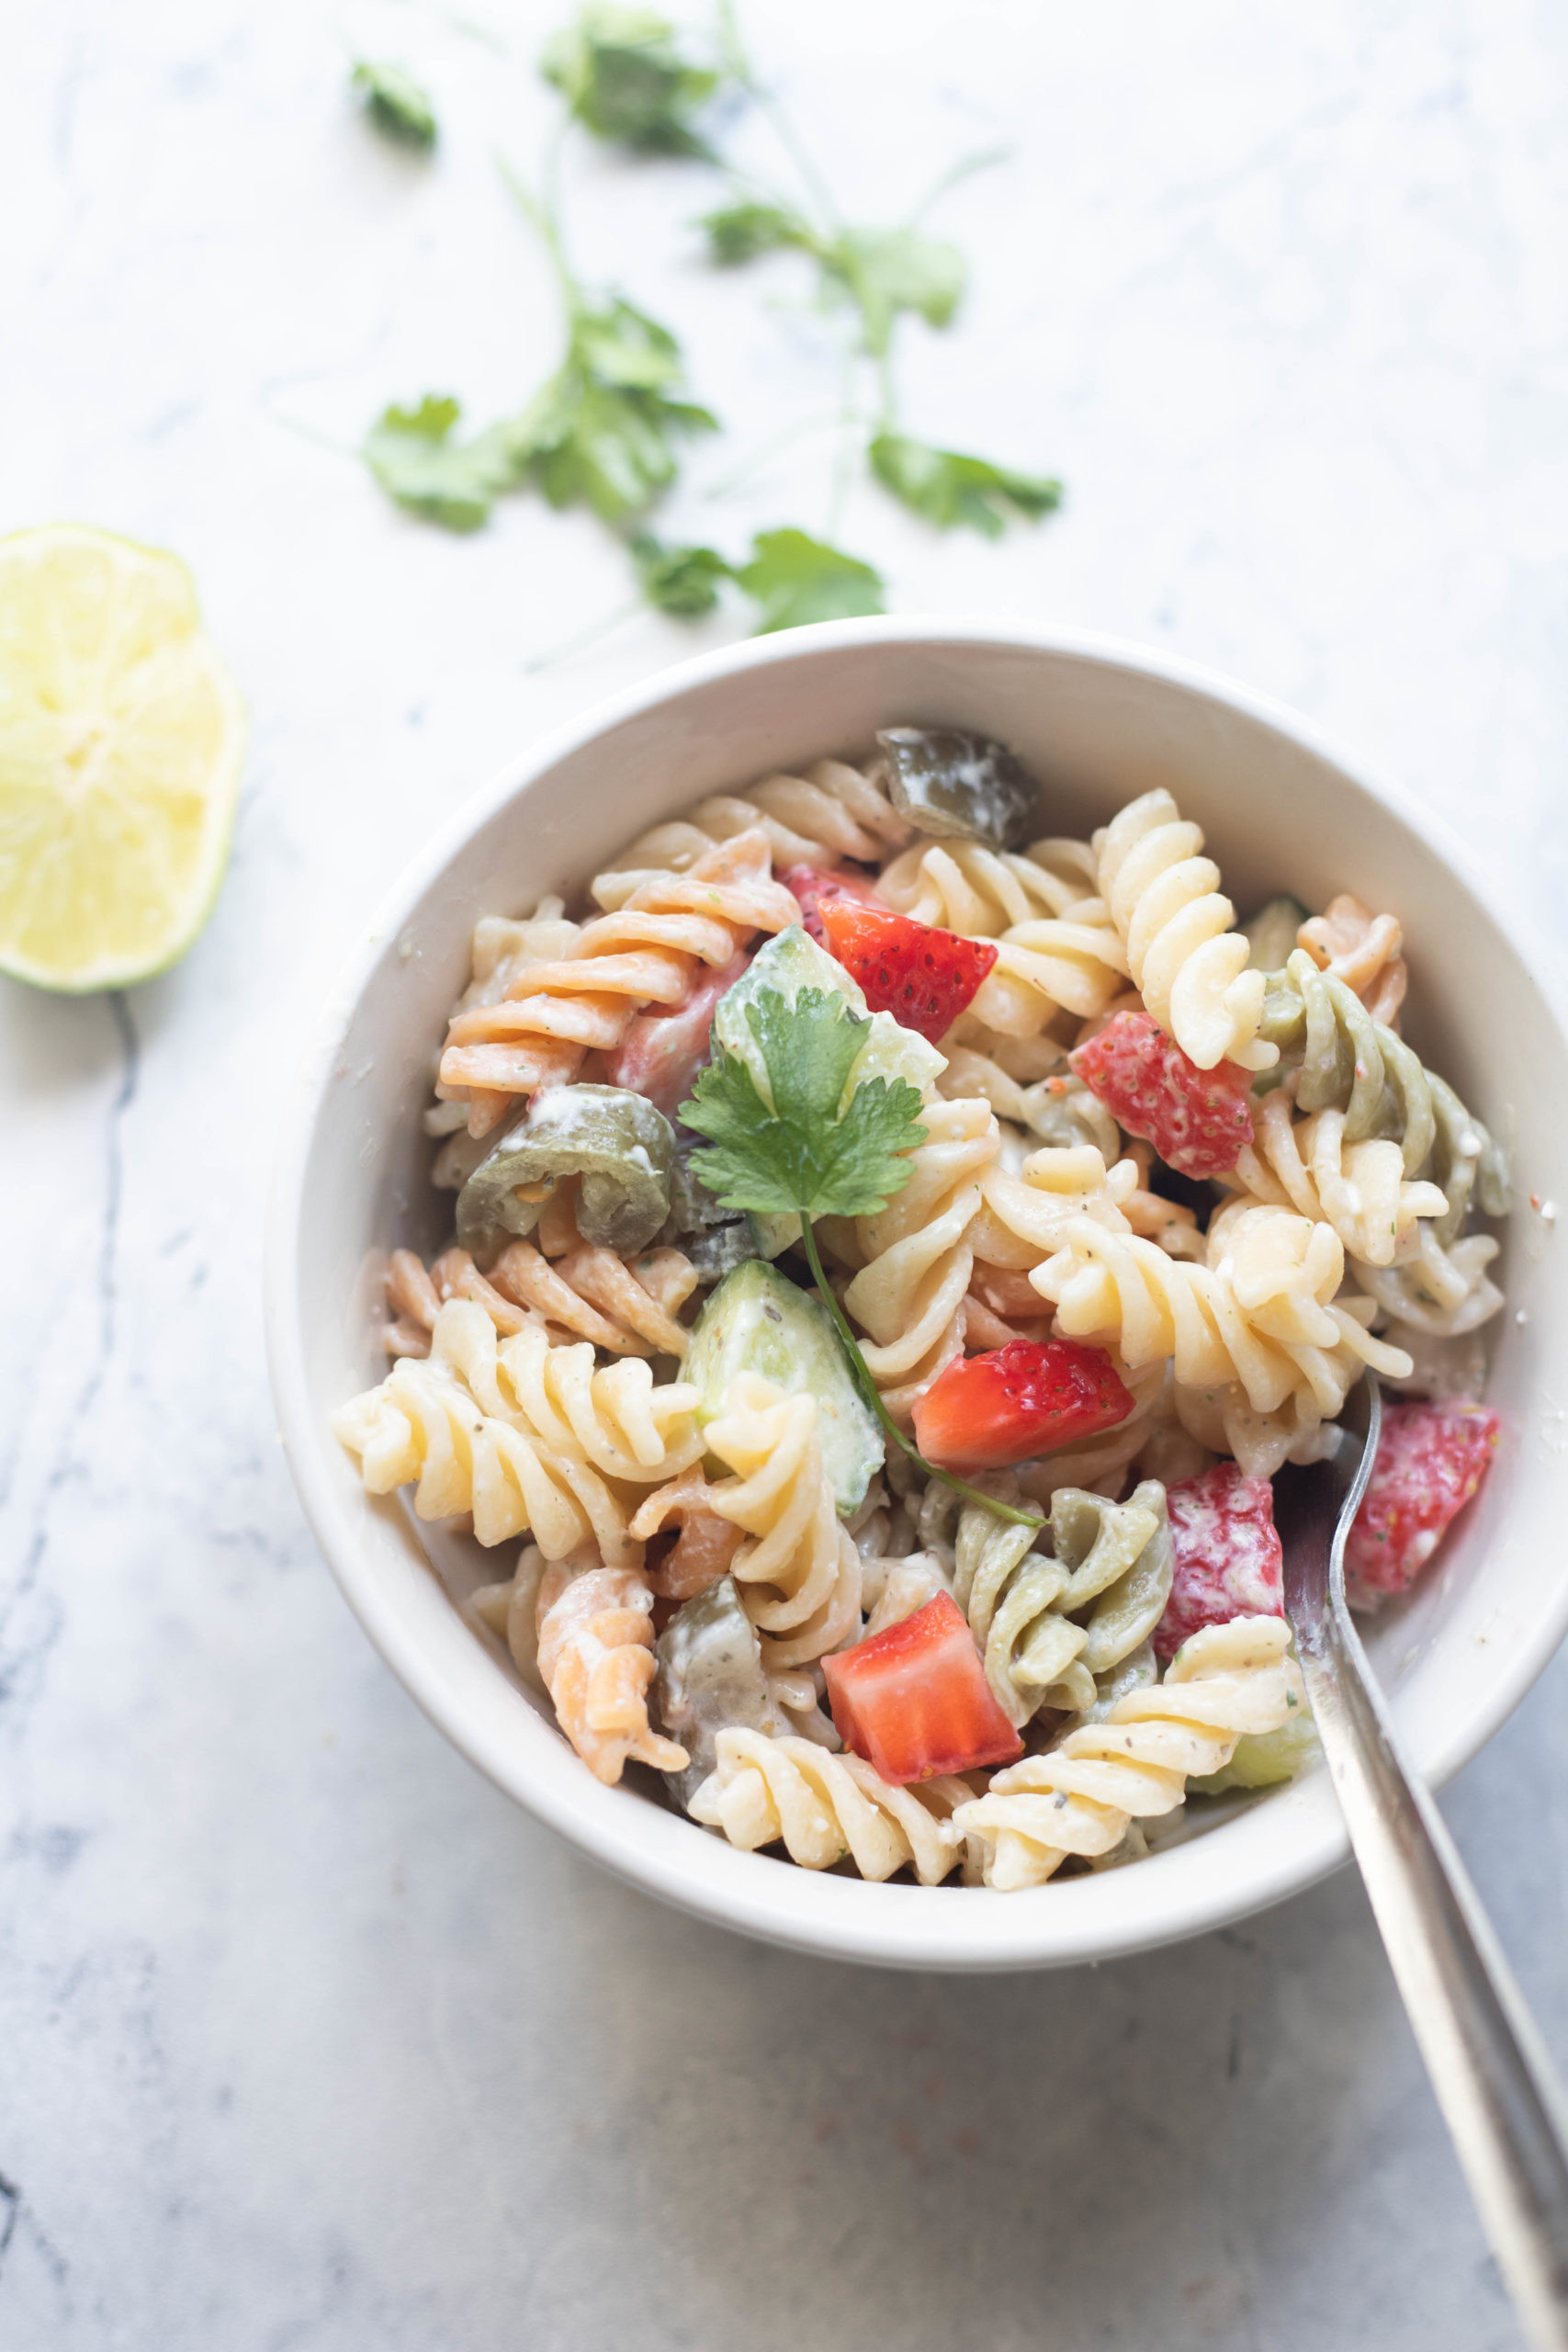 Low Fat Pasta Salad Inspirational Creamy Low Fat Pasta Salad with Cottage Cheese Fat Rainbow